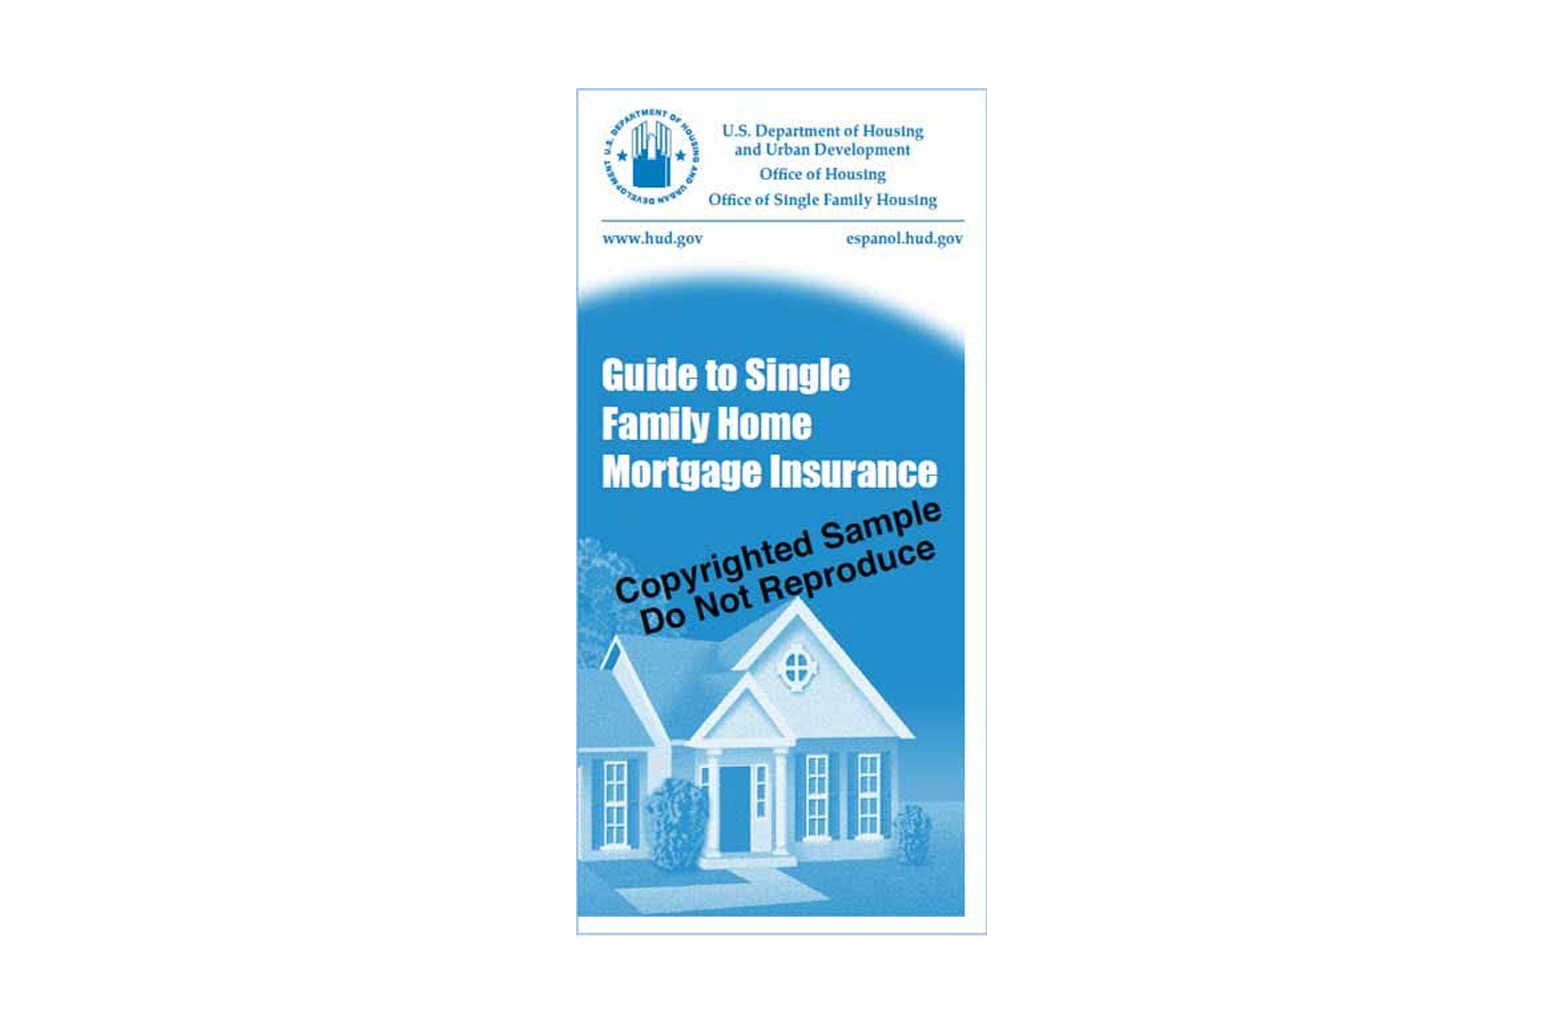 Guide to Single Family Home Mortgage Insurance